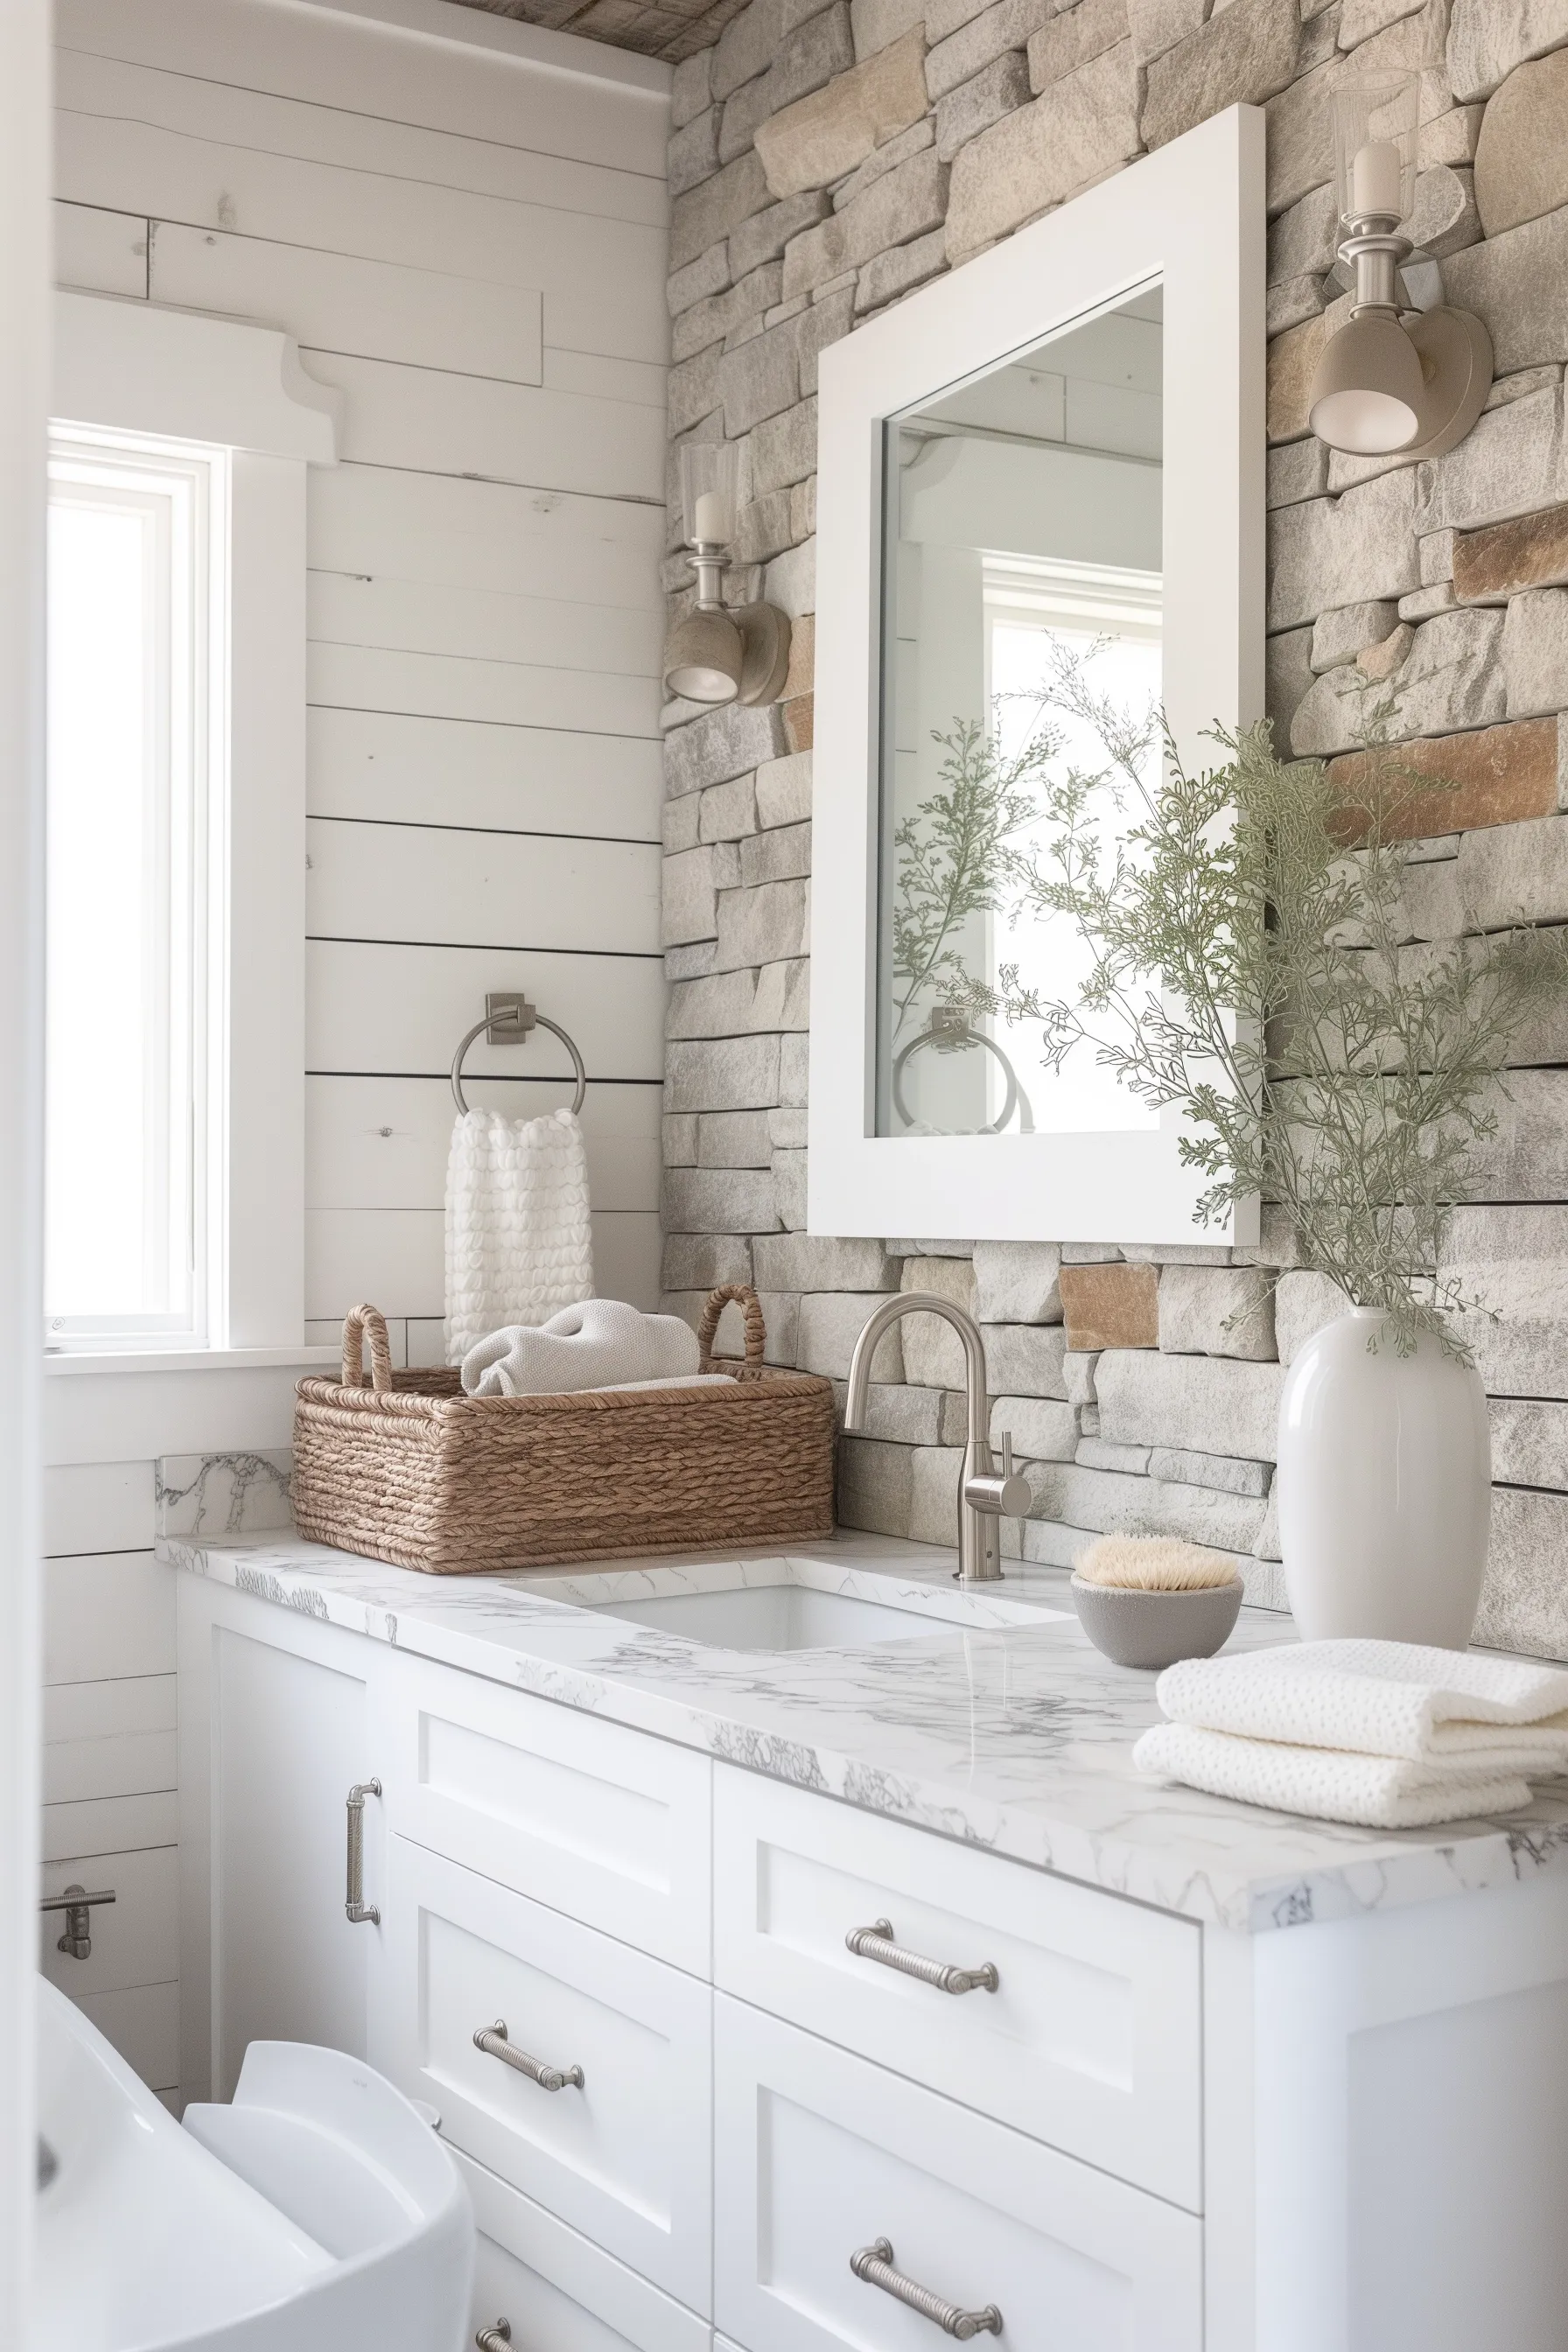 A bathroom with a stone wall and marble countertop